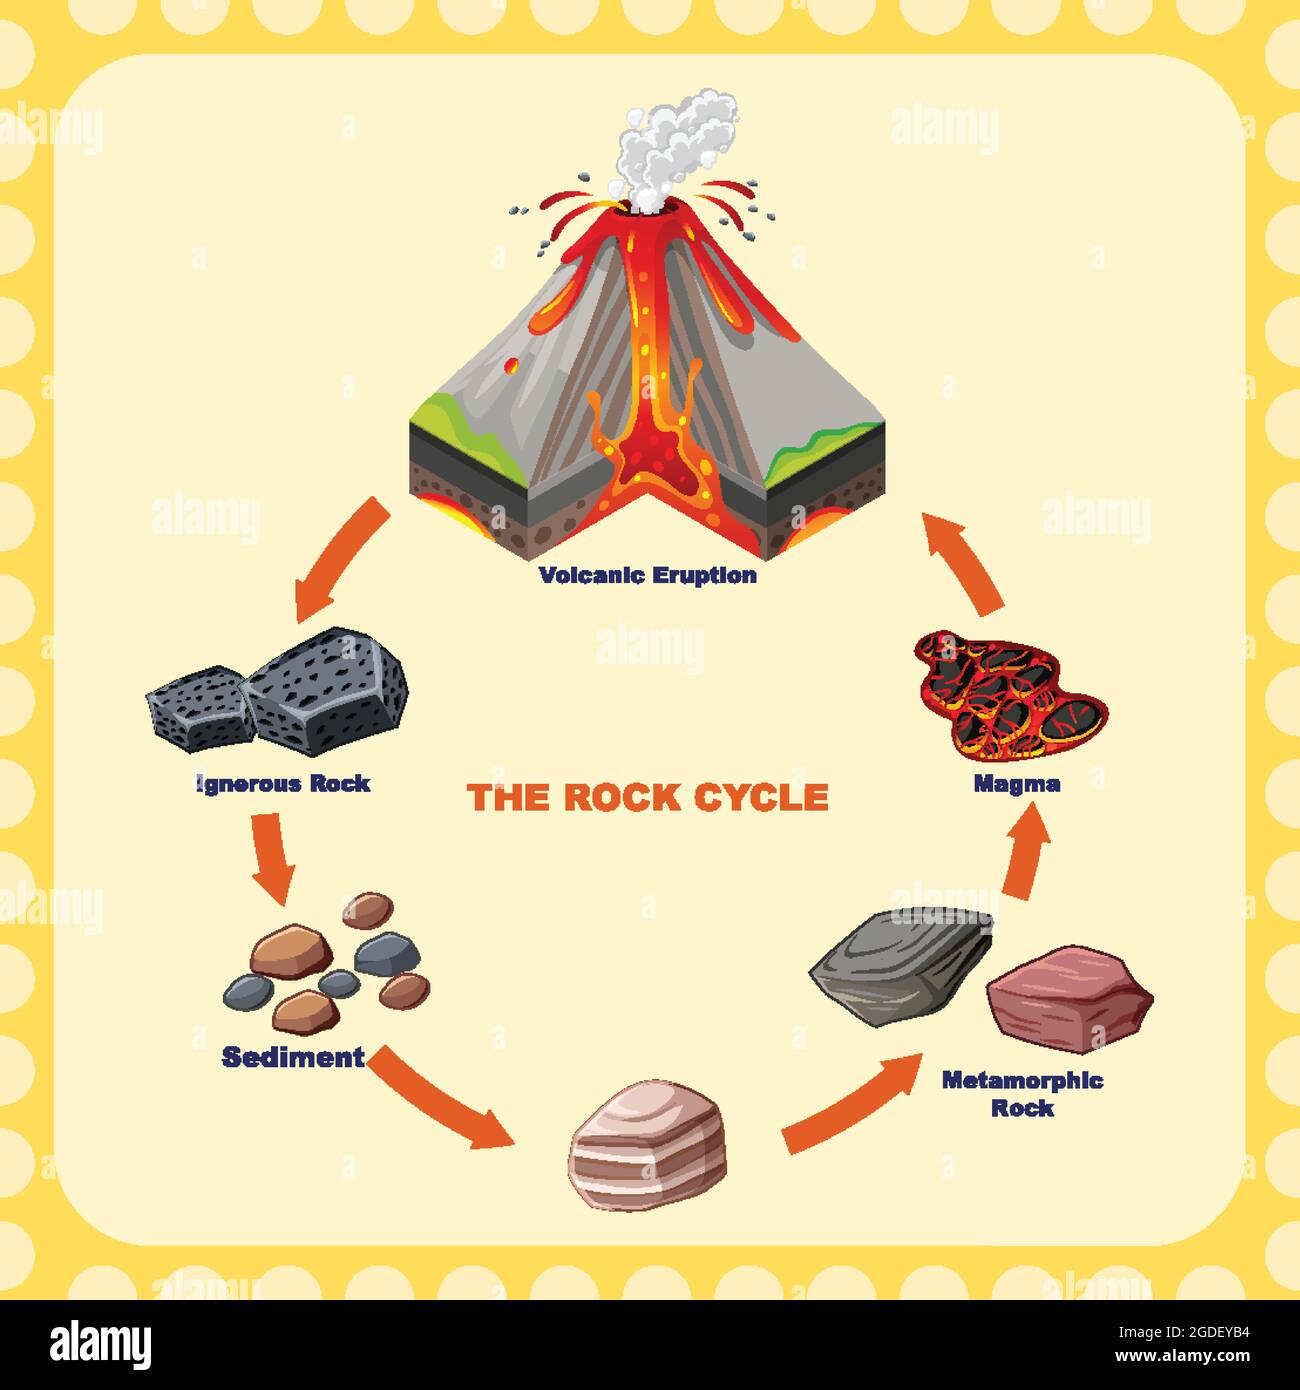 The Rock Cycle! Gr. 6 | Rock cycle, Mineralogy, Waldorf teaching